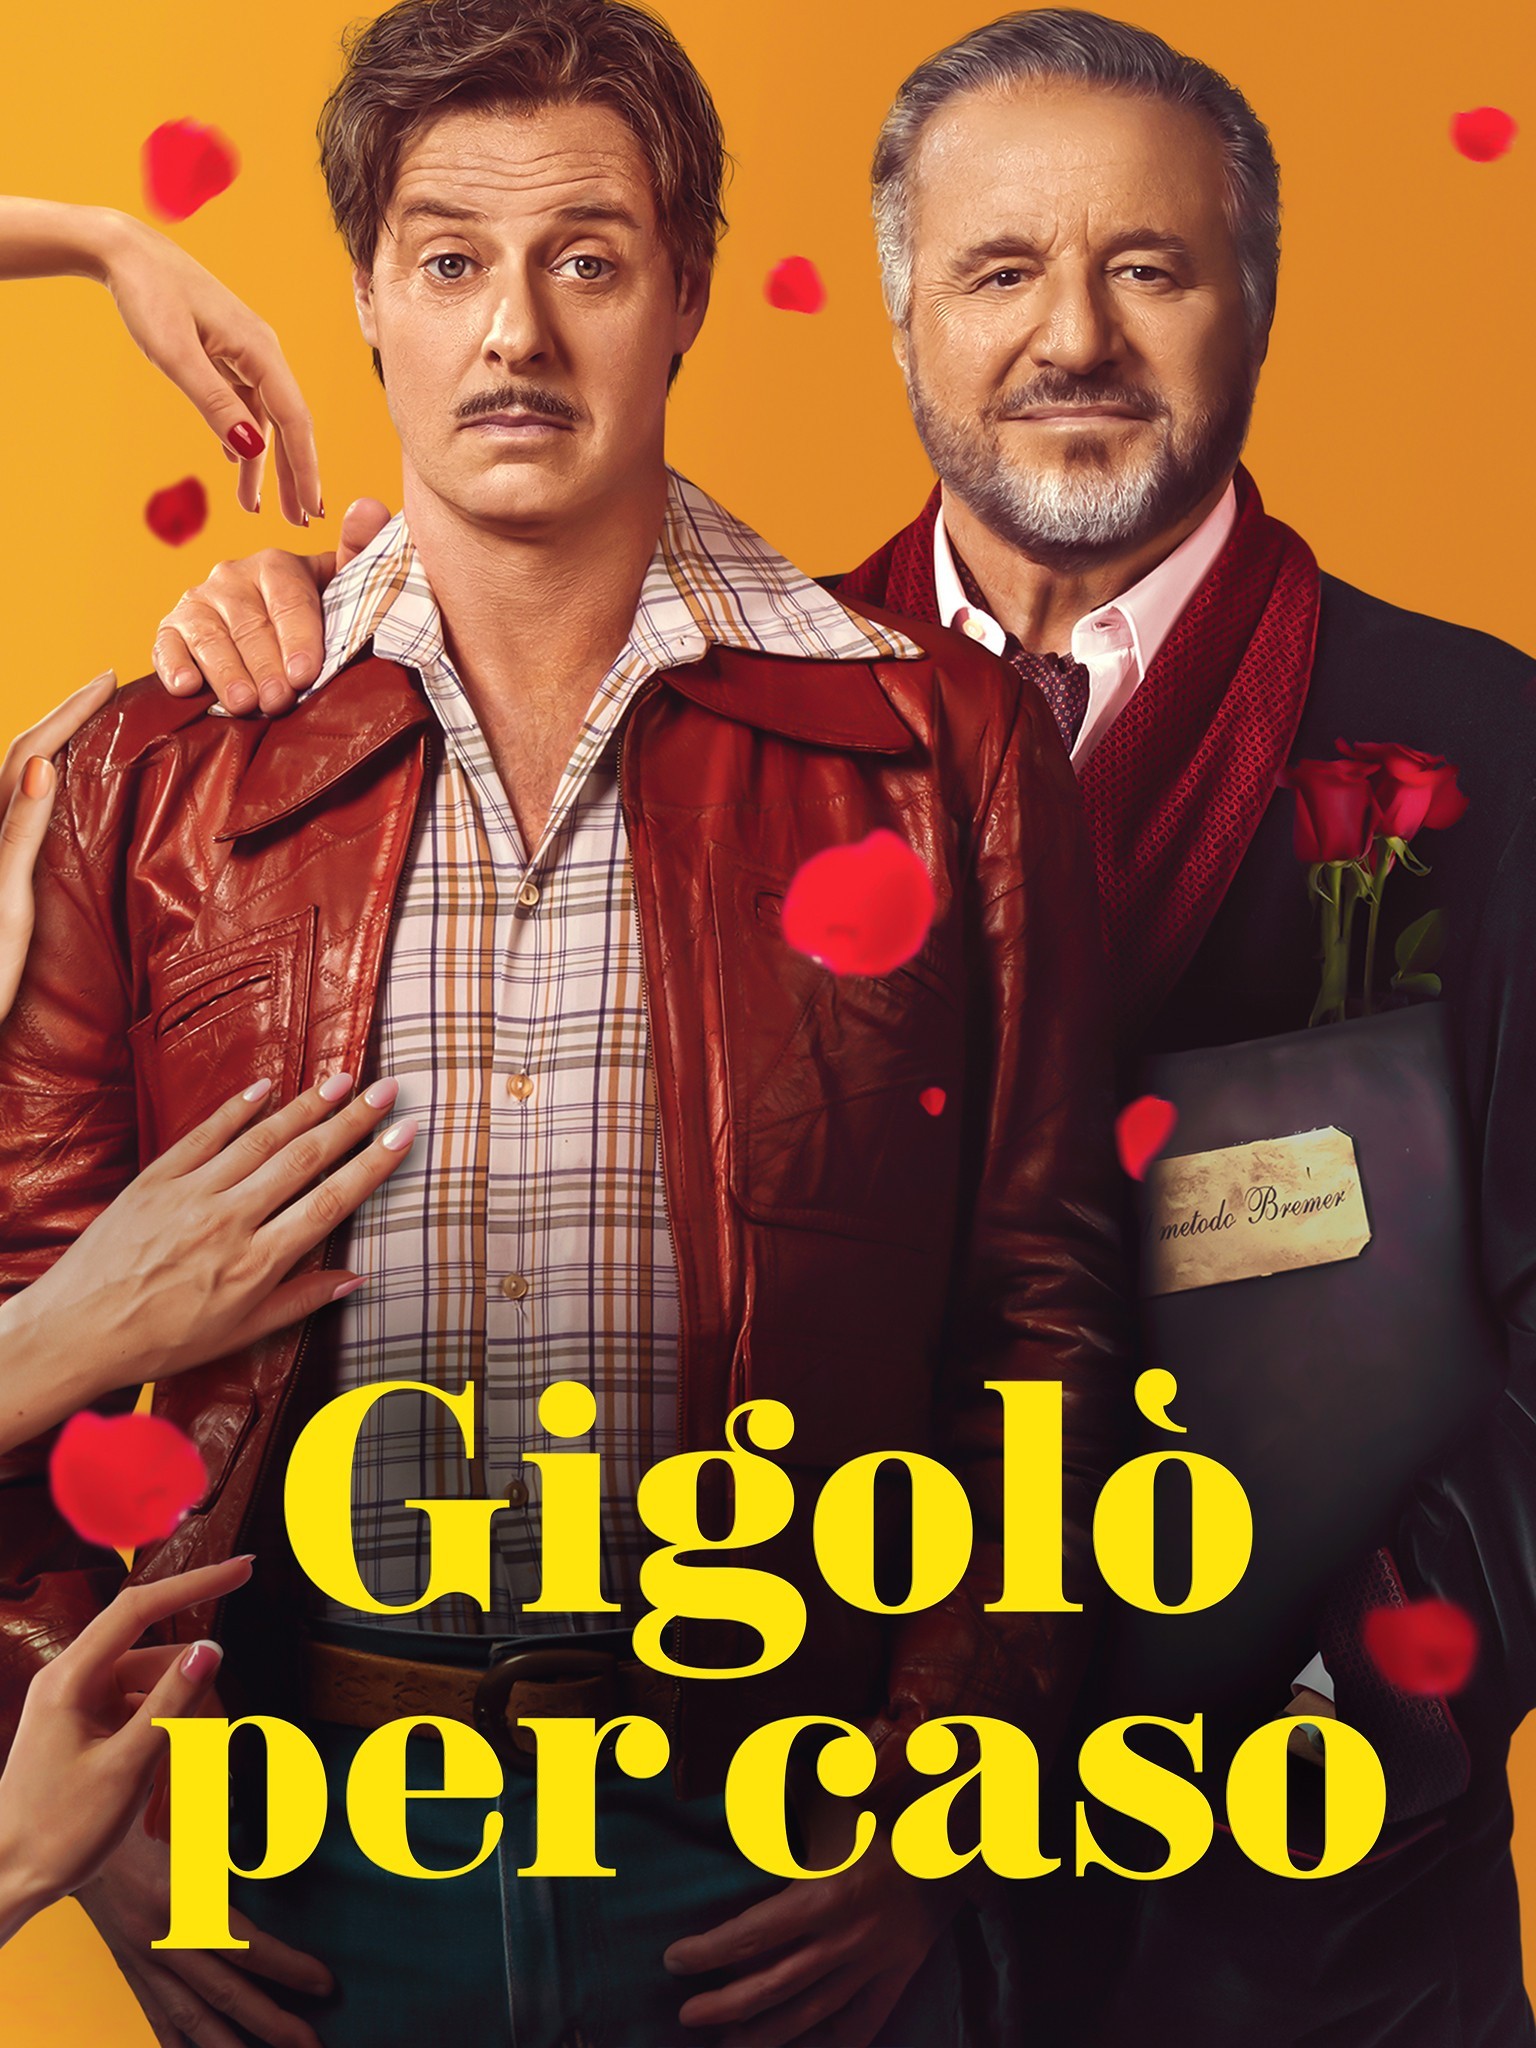 Fading Gigolo Update: First International Release Dates, Parker